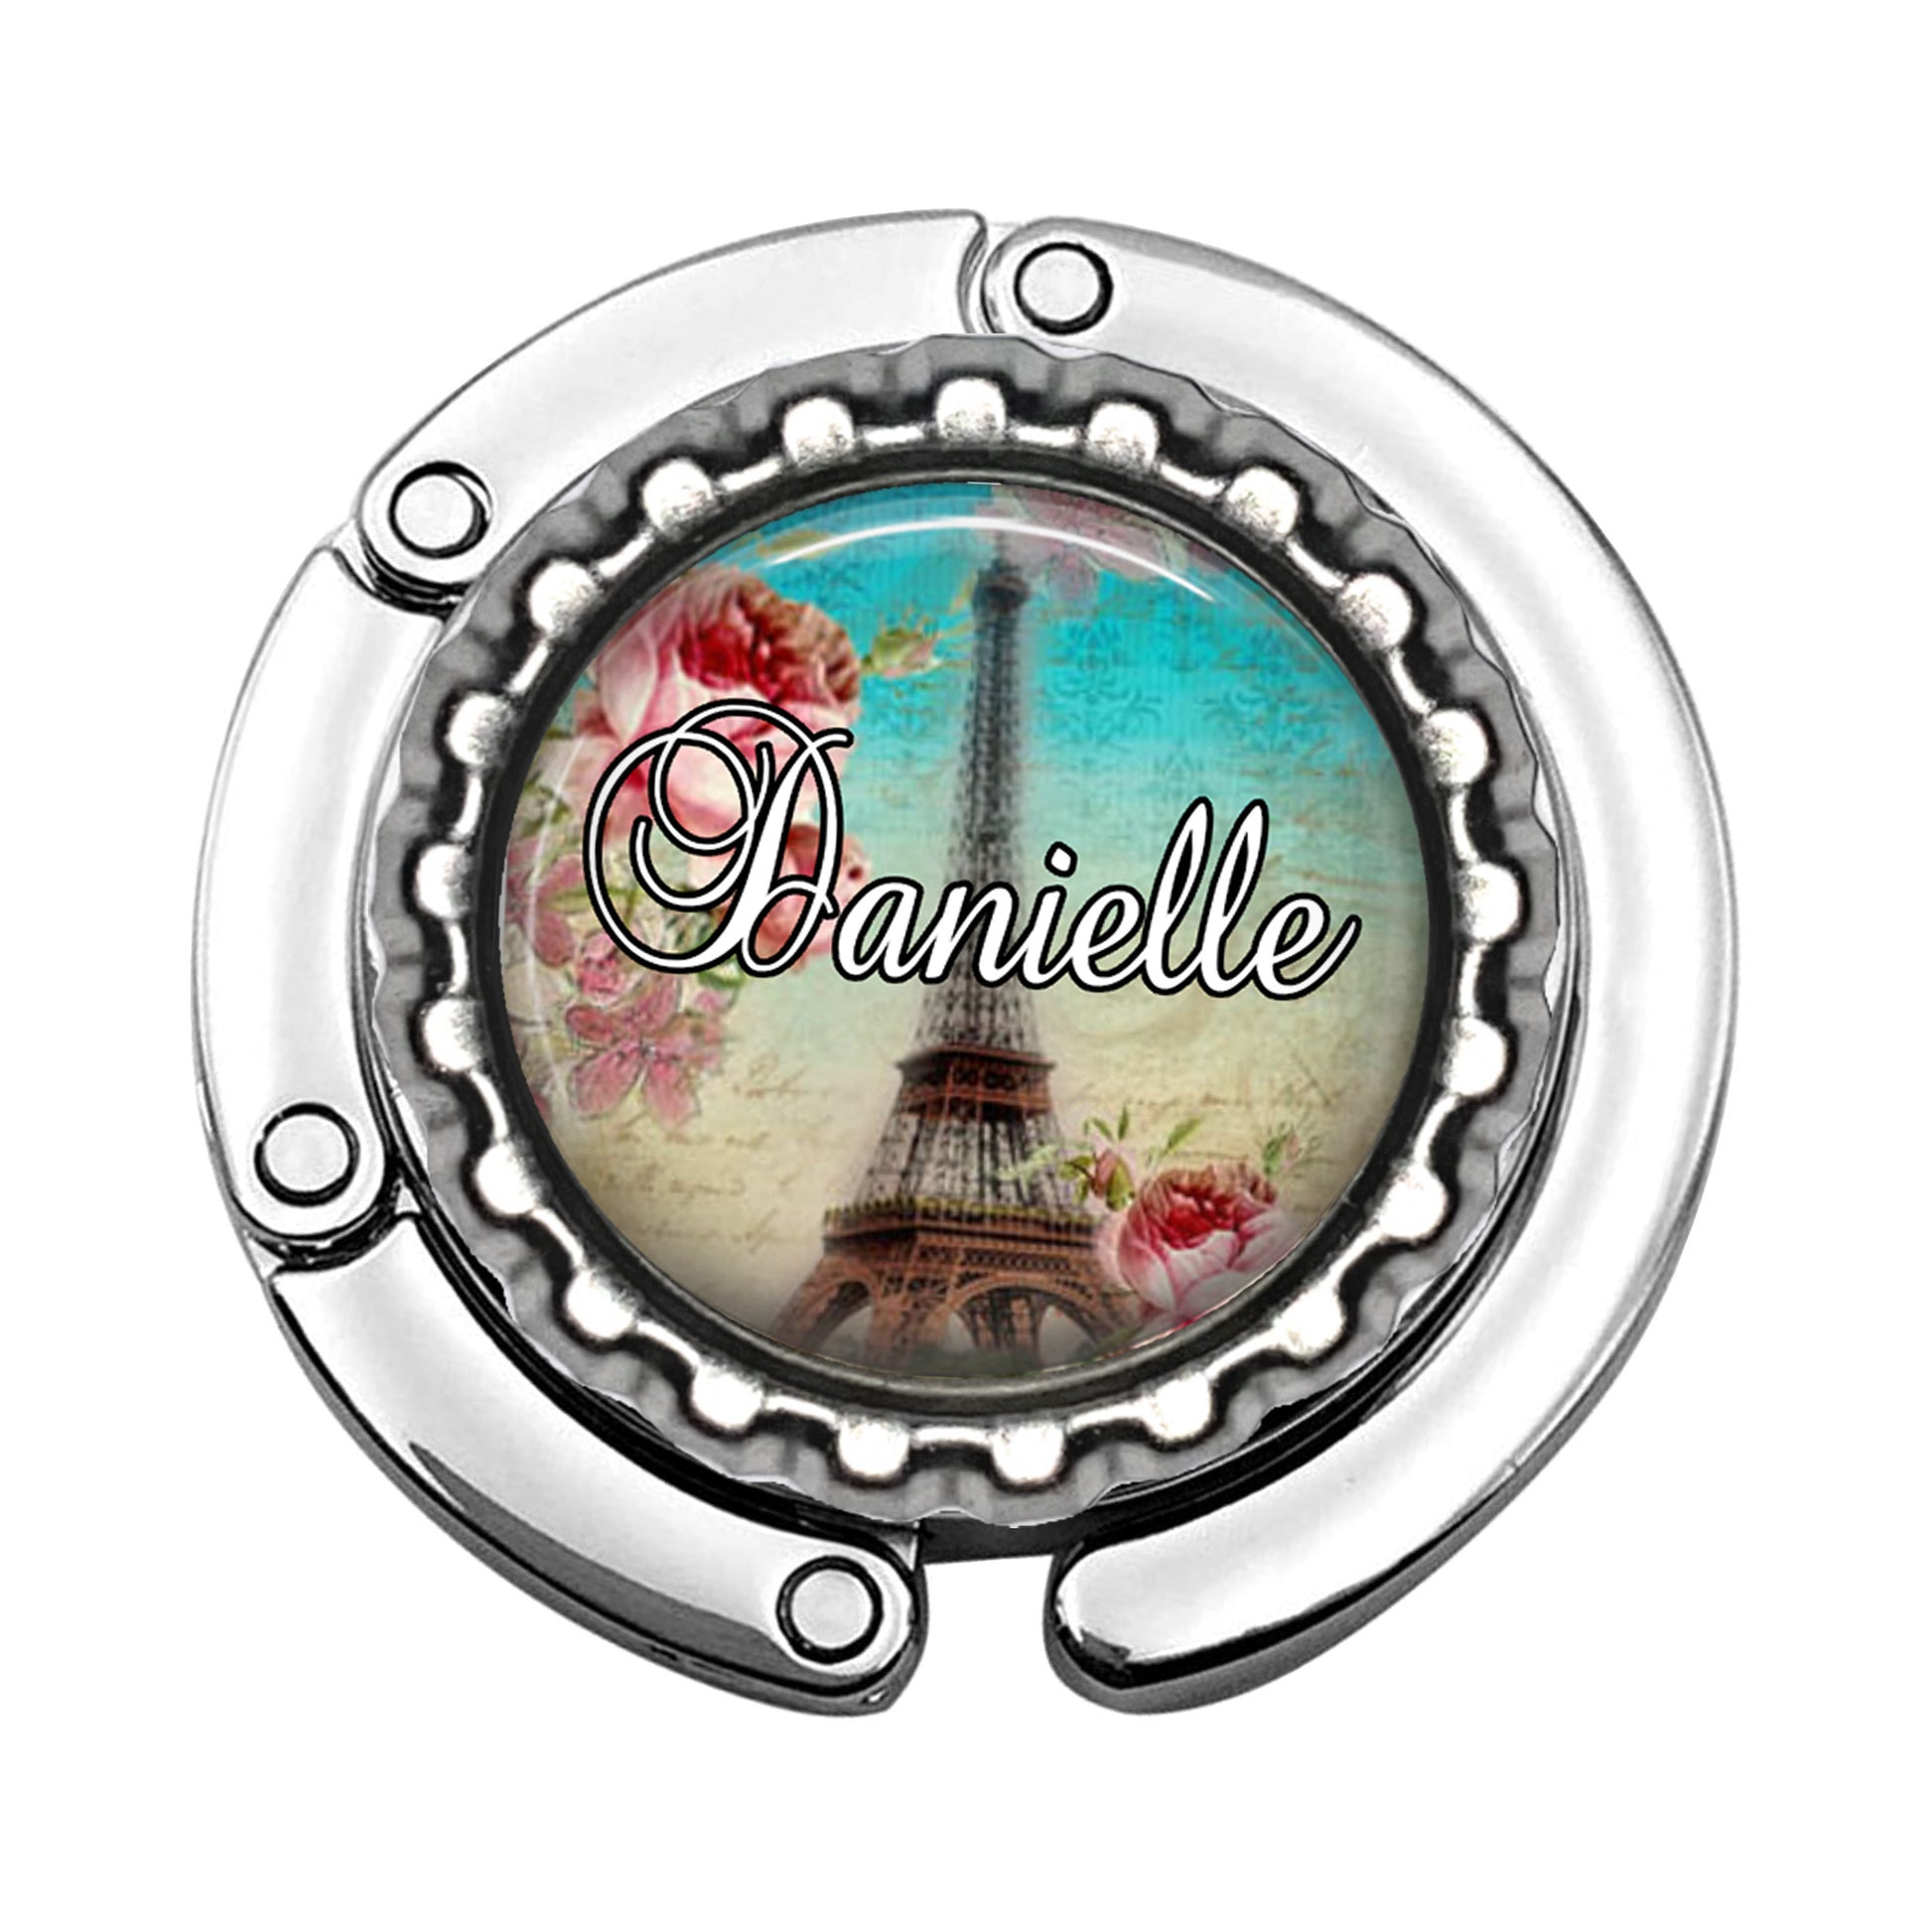 a bottle cap with a picture of the eiffel tower